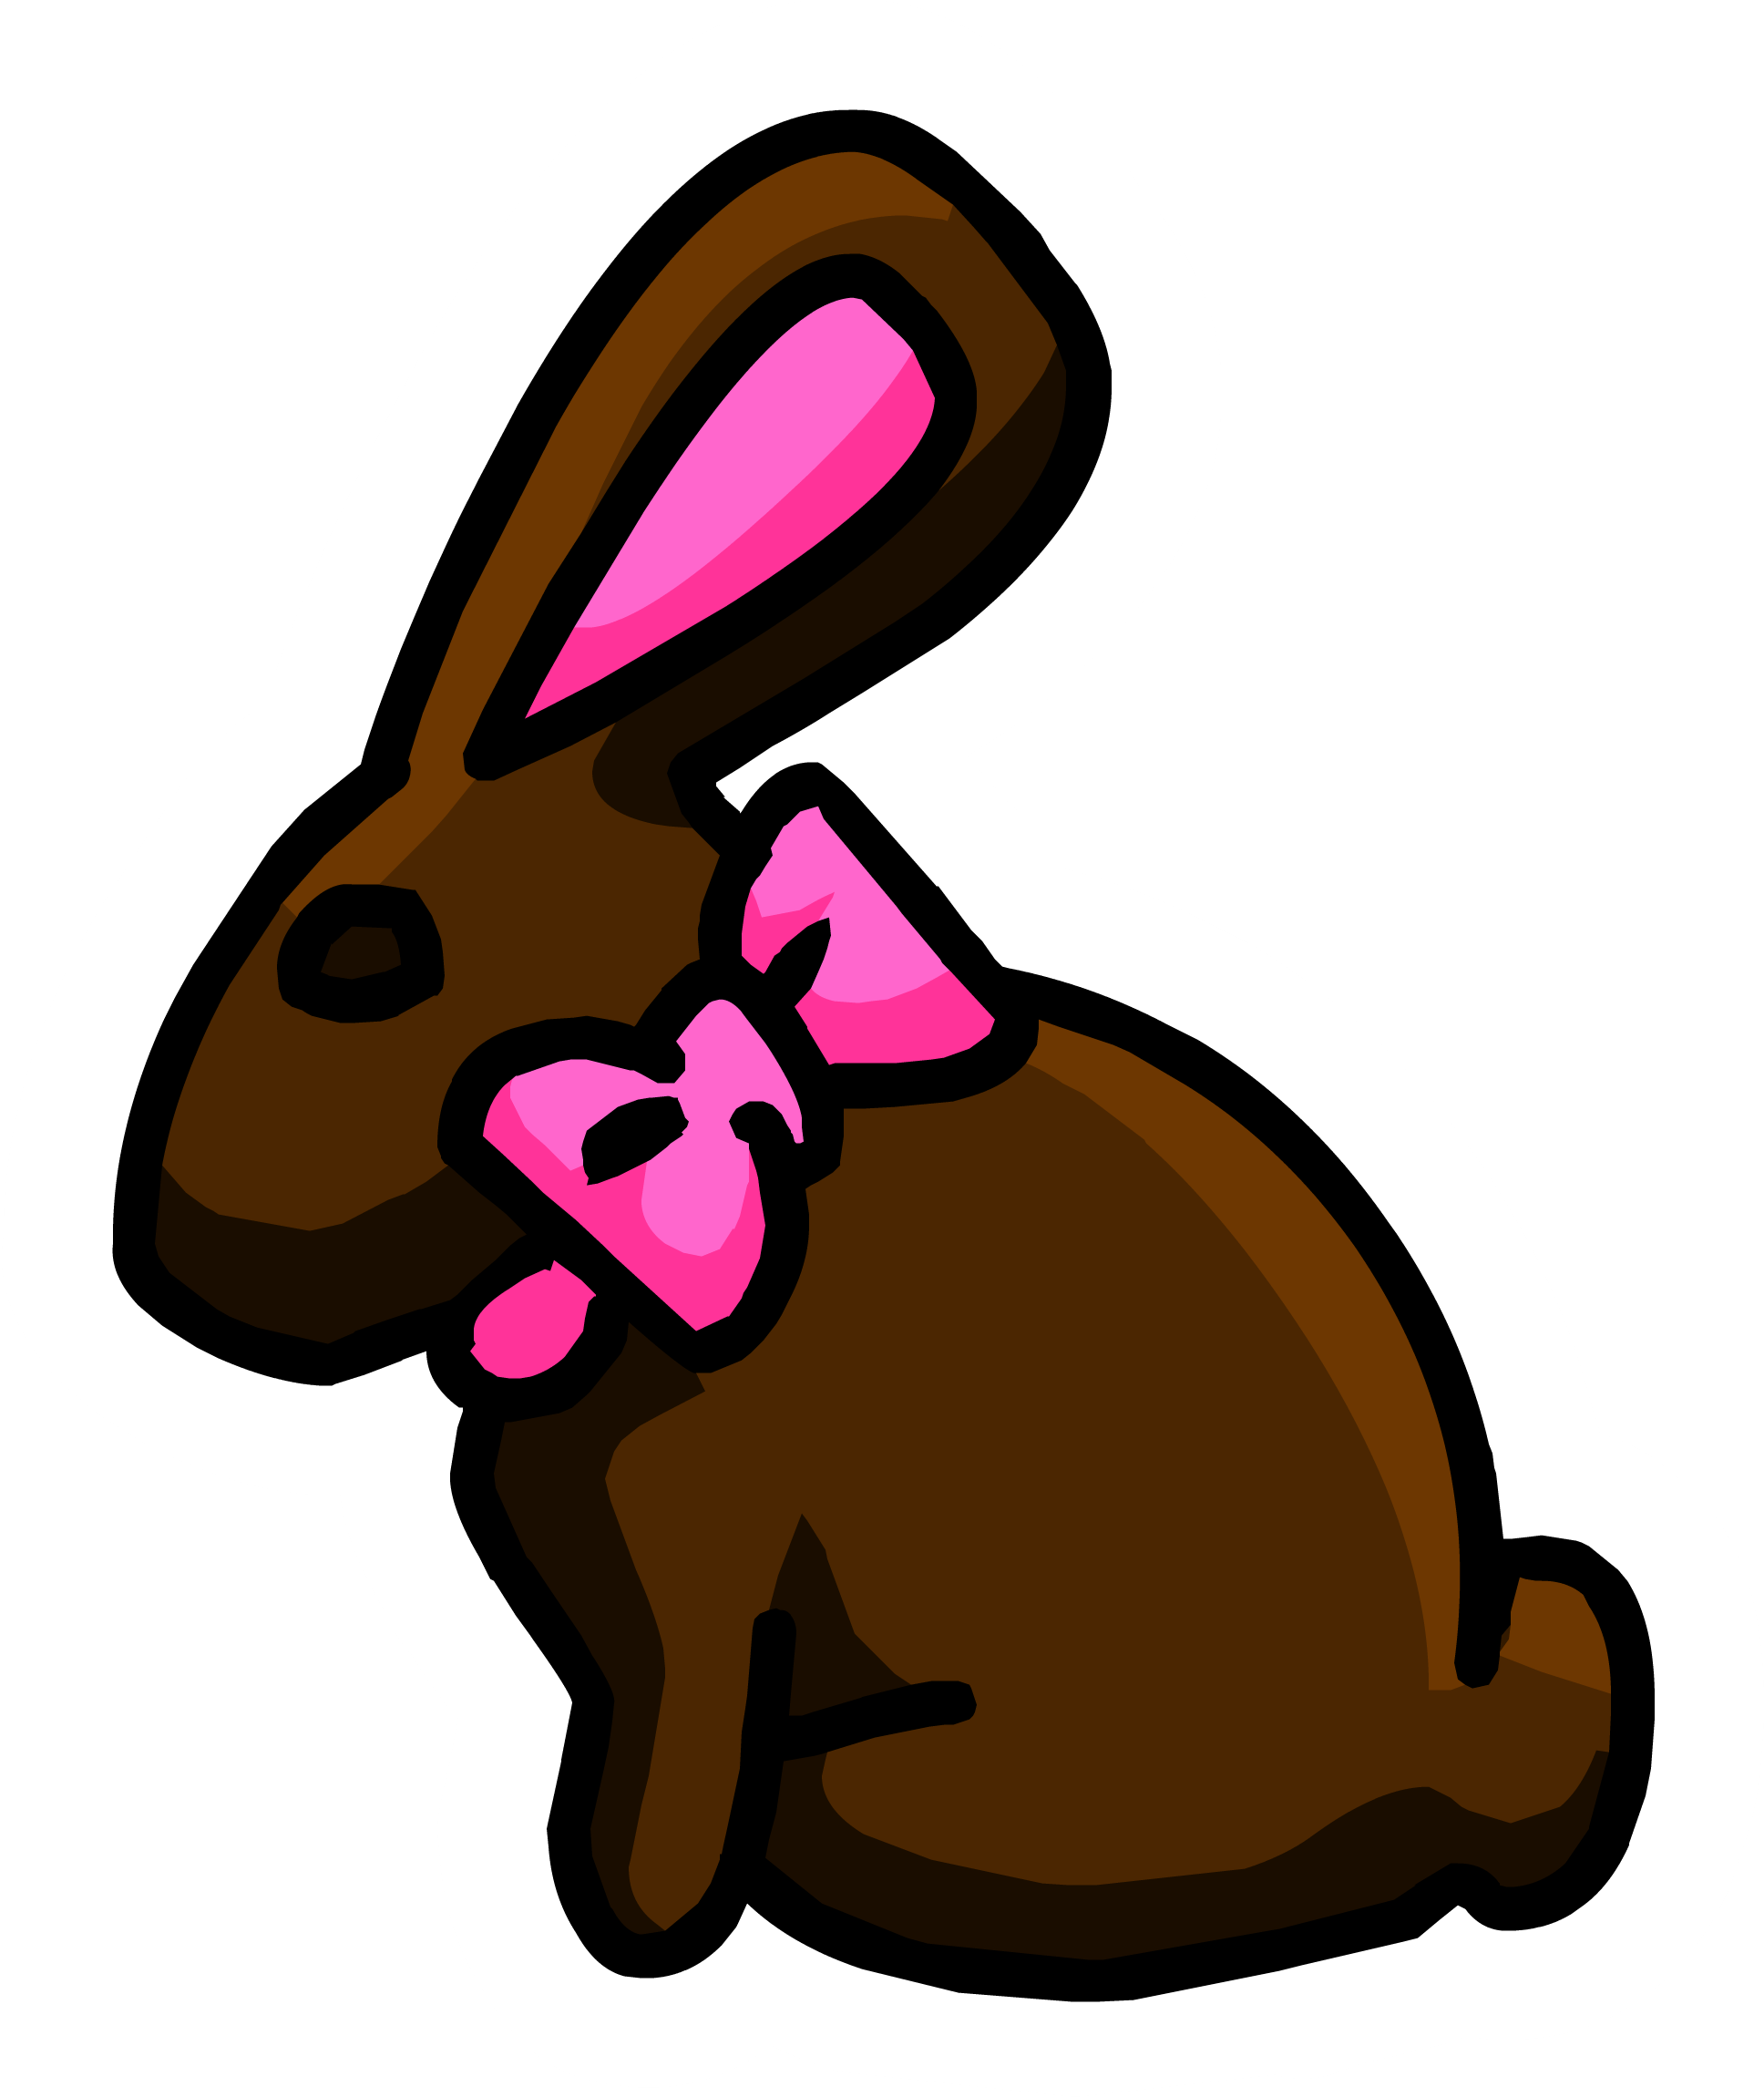 03, October 14, 2013 - Chocolate Bunny Free Clipart (2500x2500)